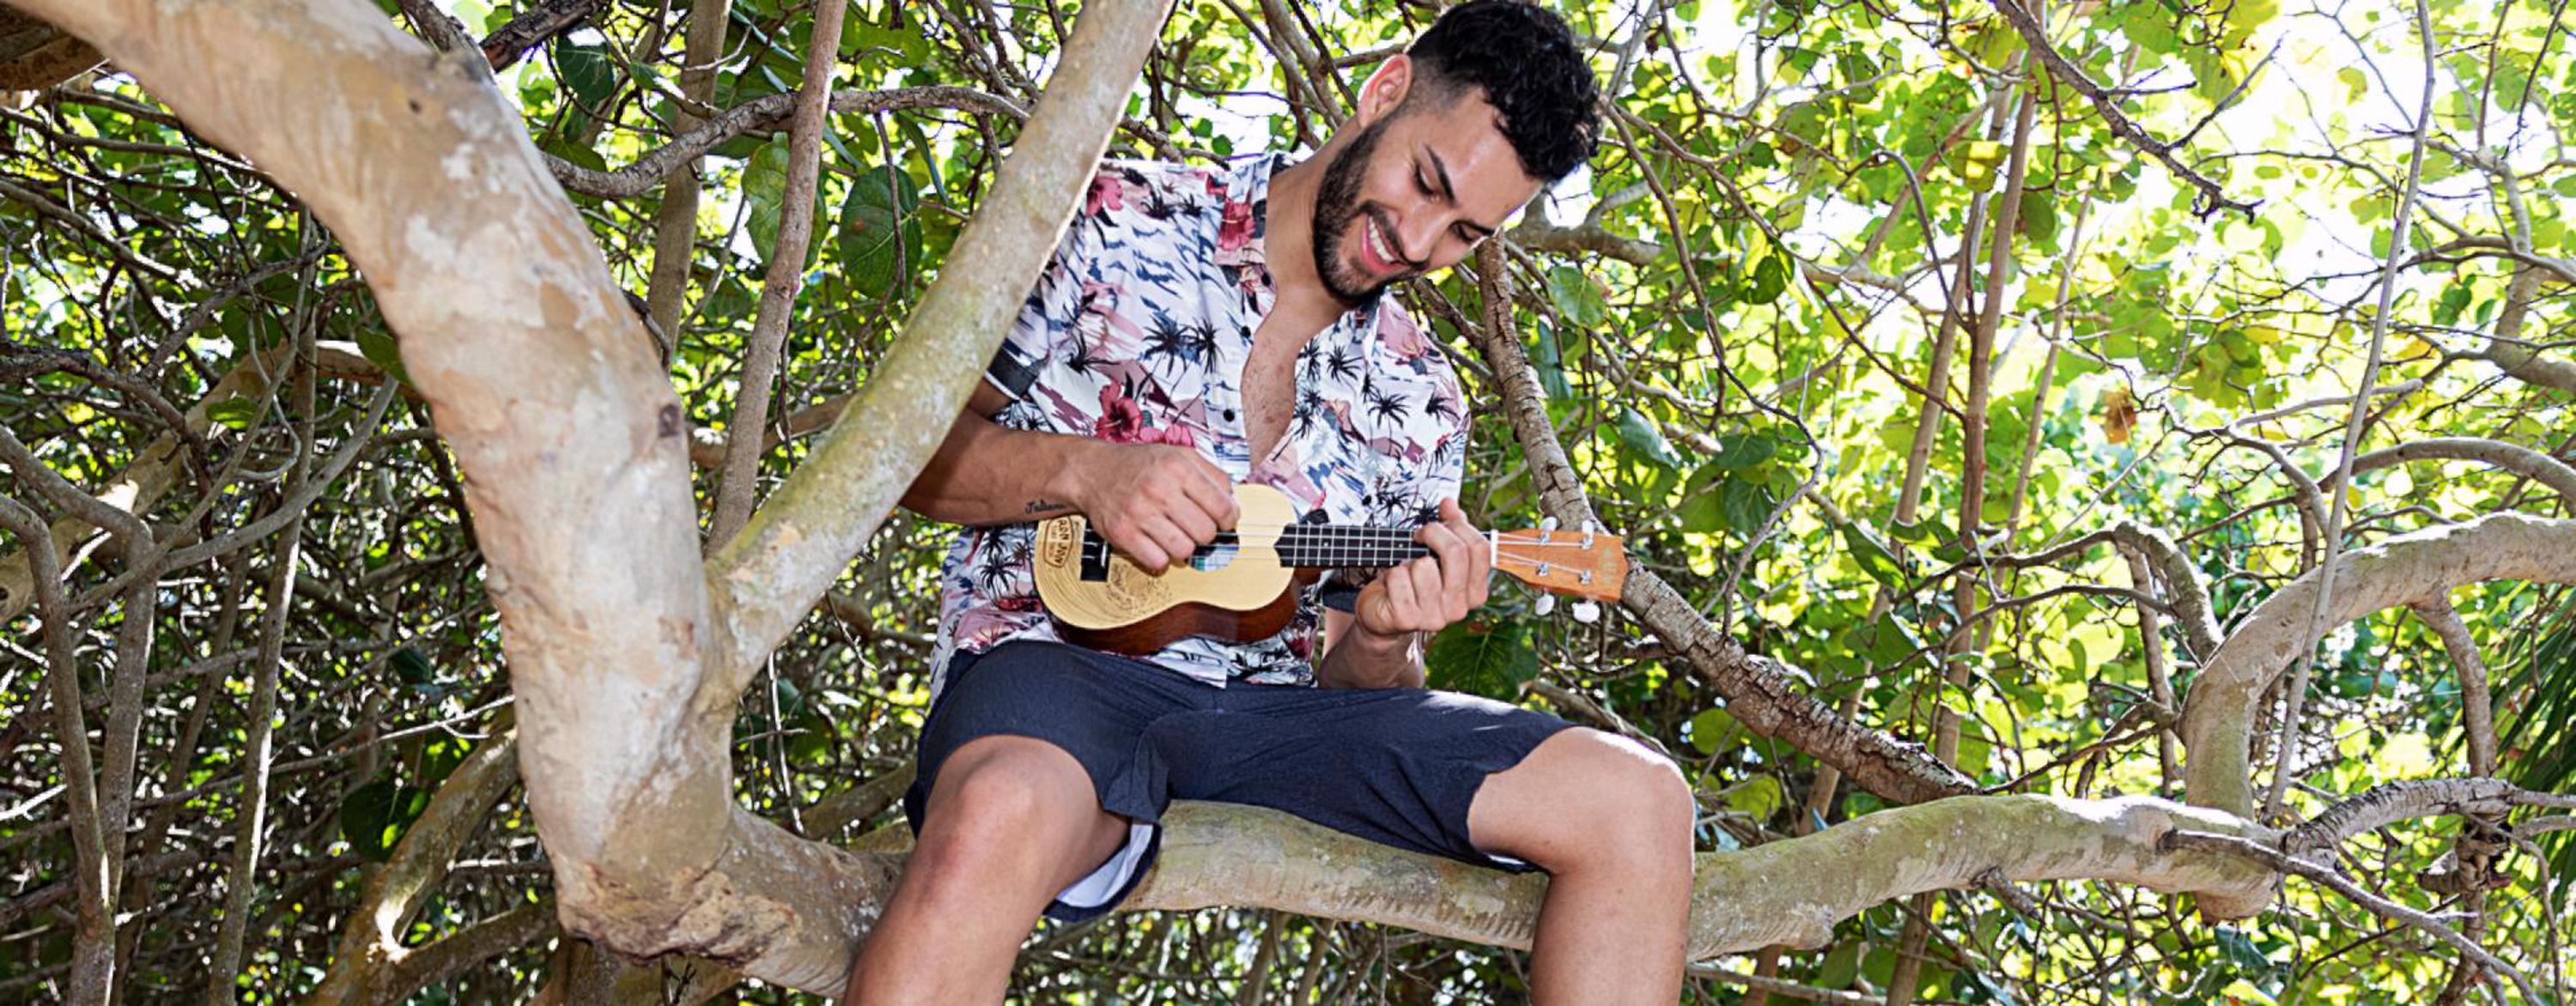 guy playing a ukulele in a tree